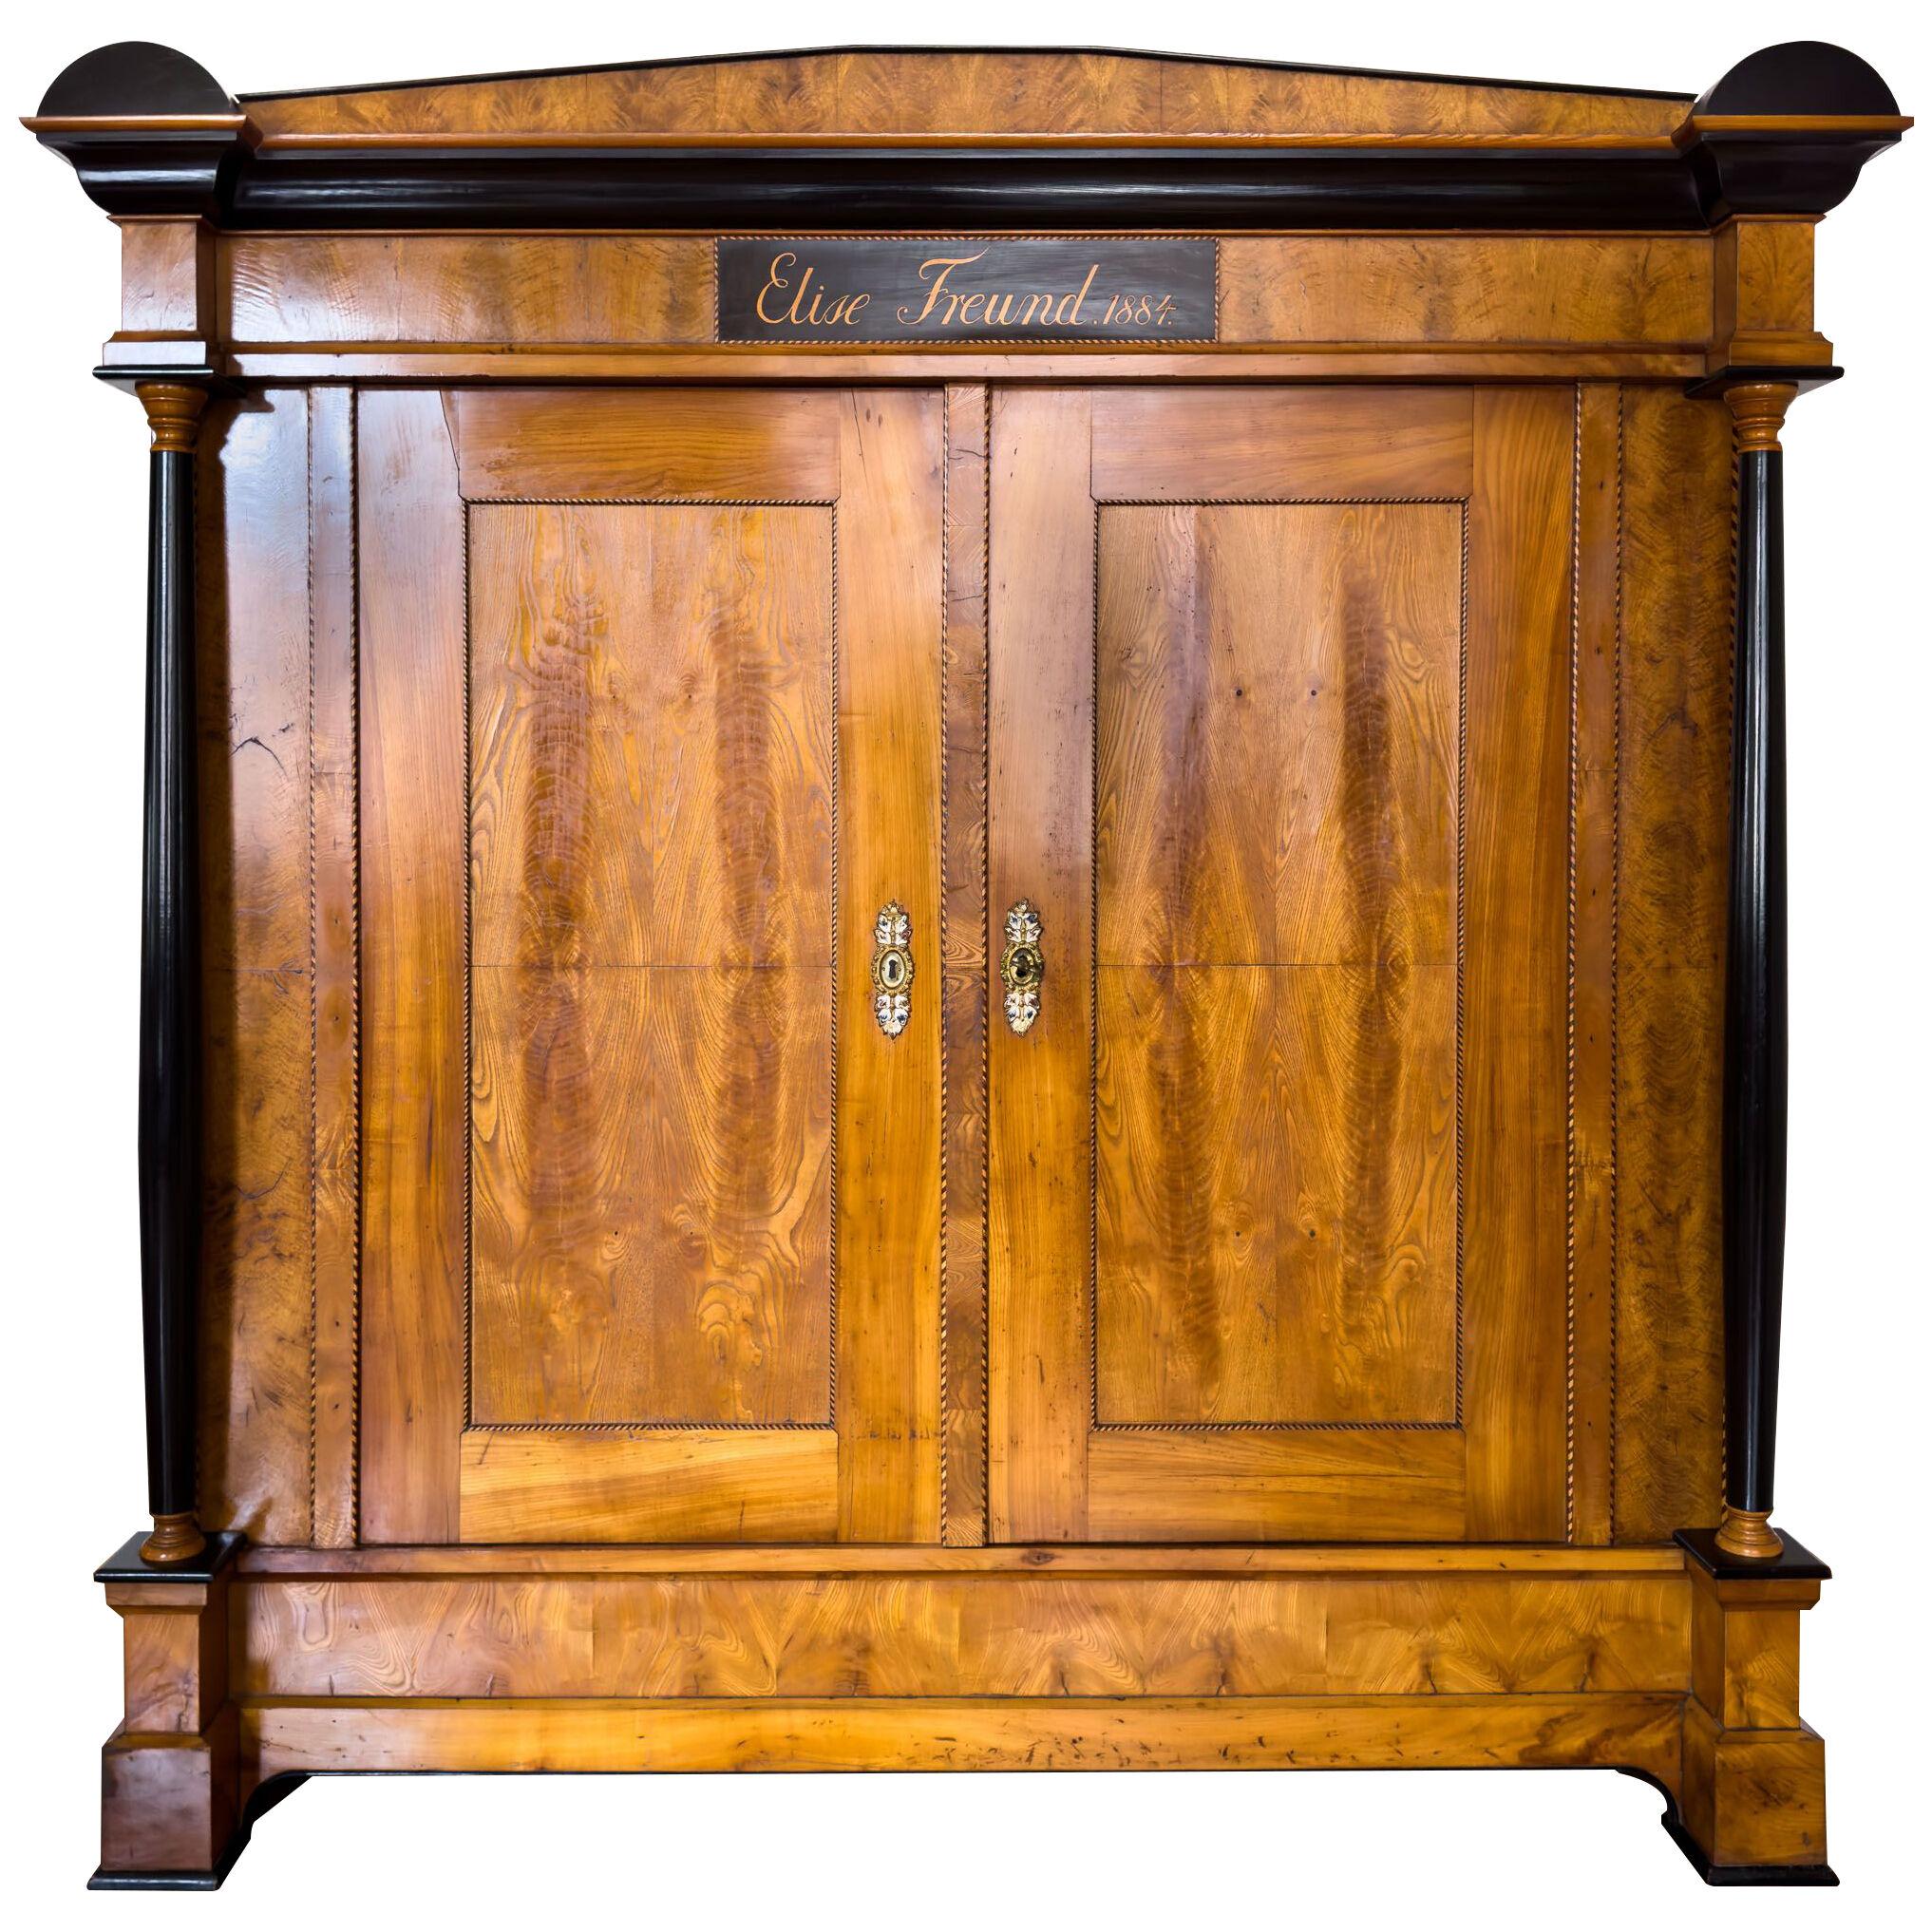 Large Biedermeier-style Wardrobe in Ash and Cherry, dated 1884